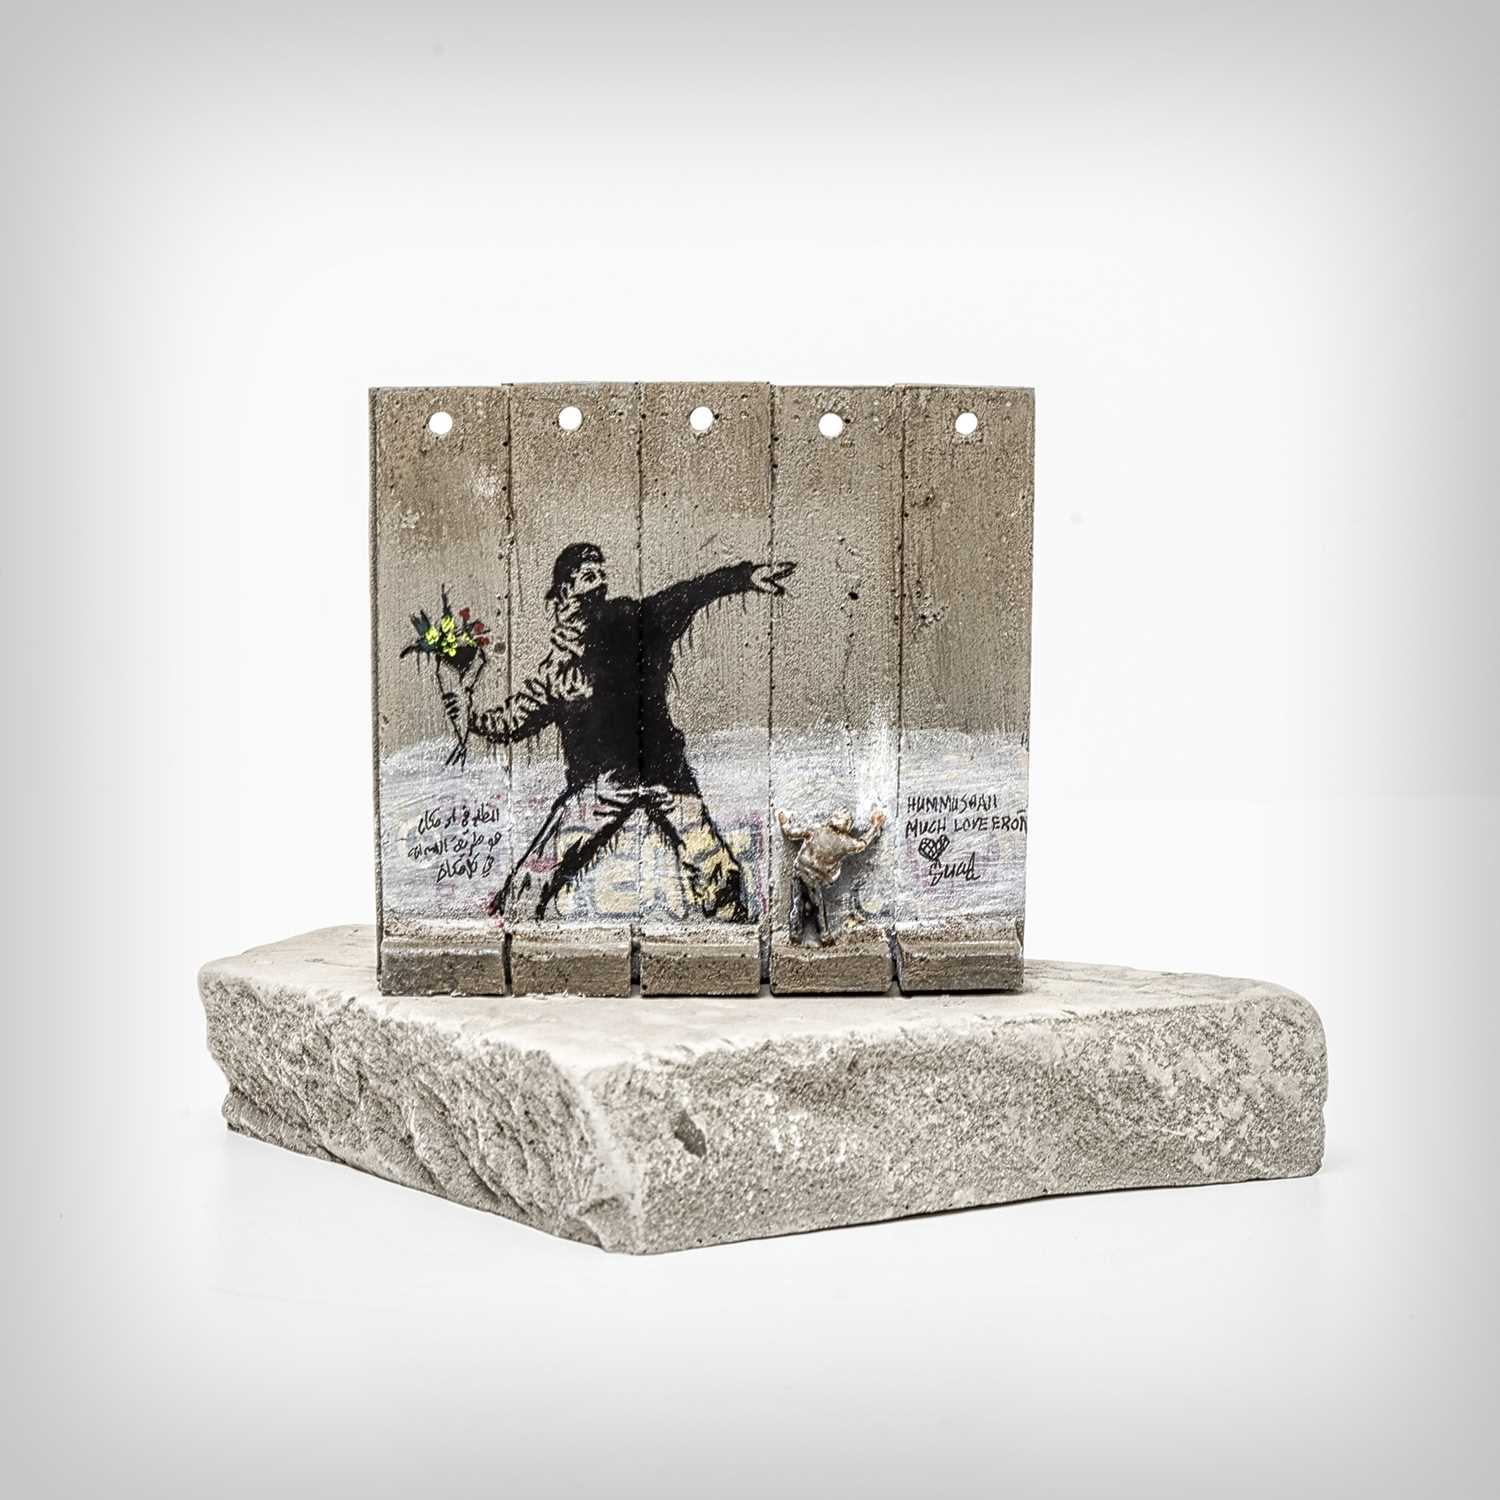 Lot 87 - Banksy (British 1974-), 'Walled Off Hotel - Five-Part Souvenir Wall Section (Flower Thrower)'